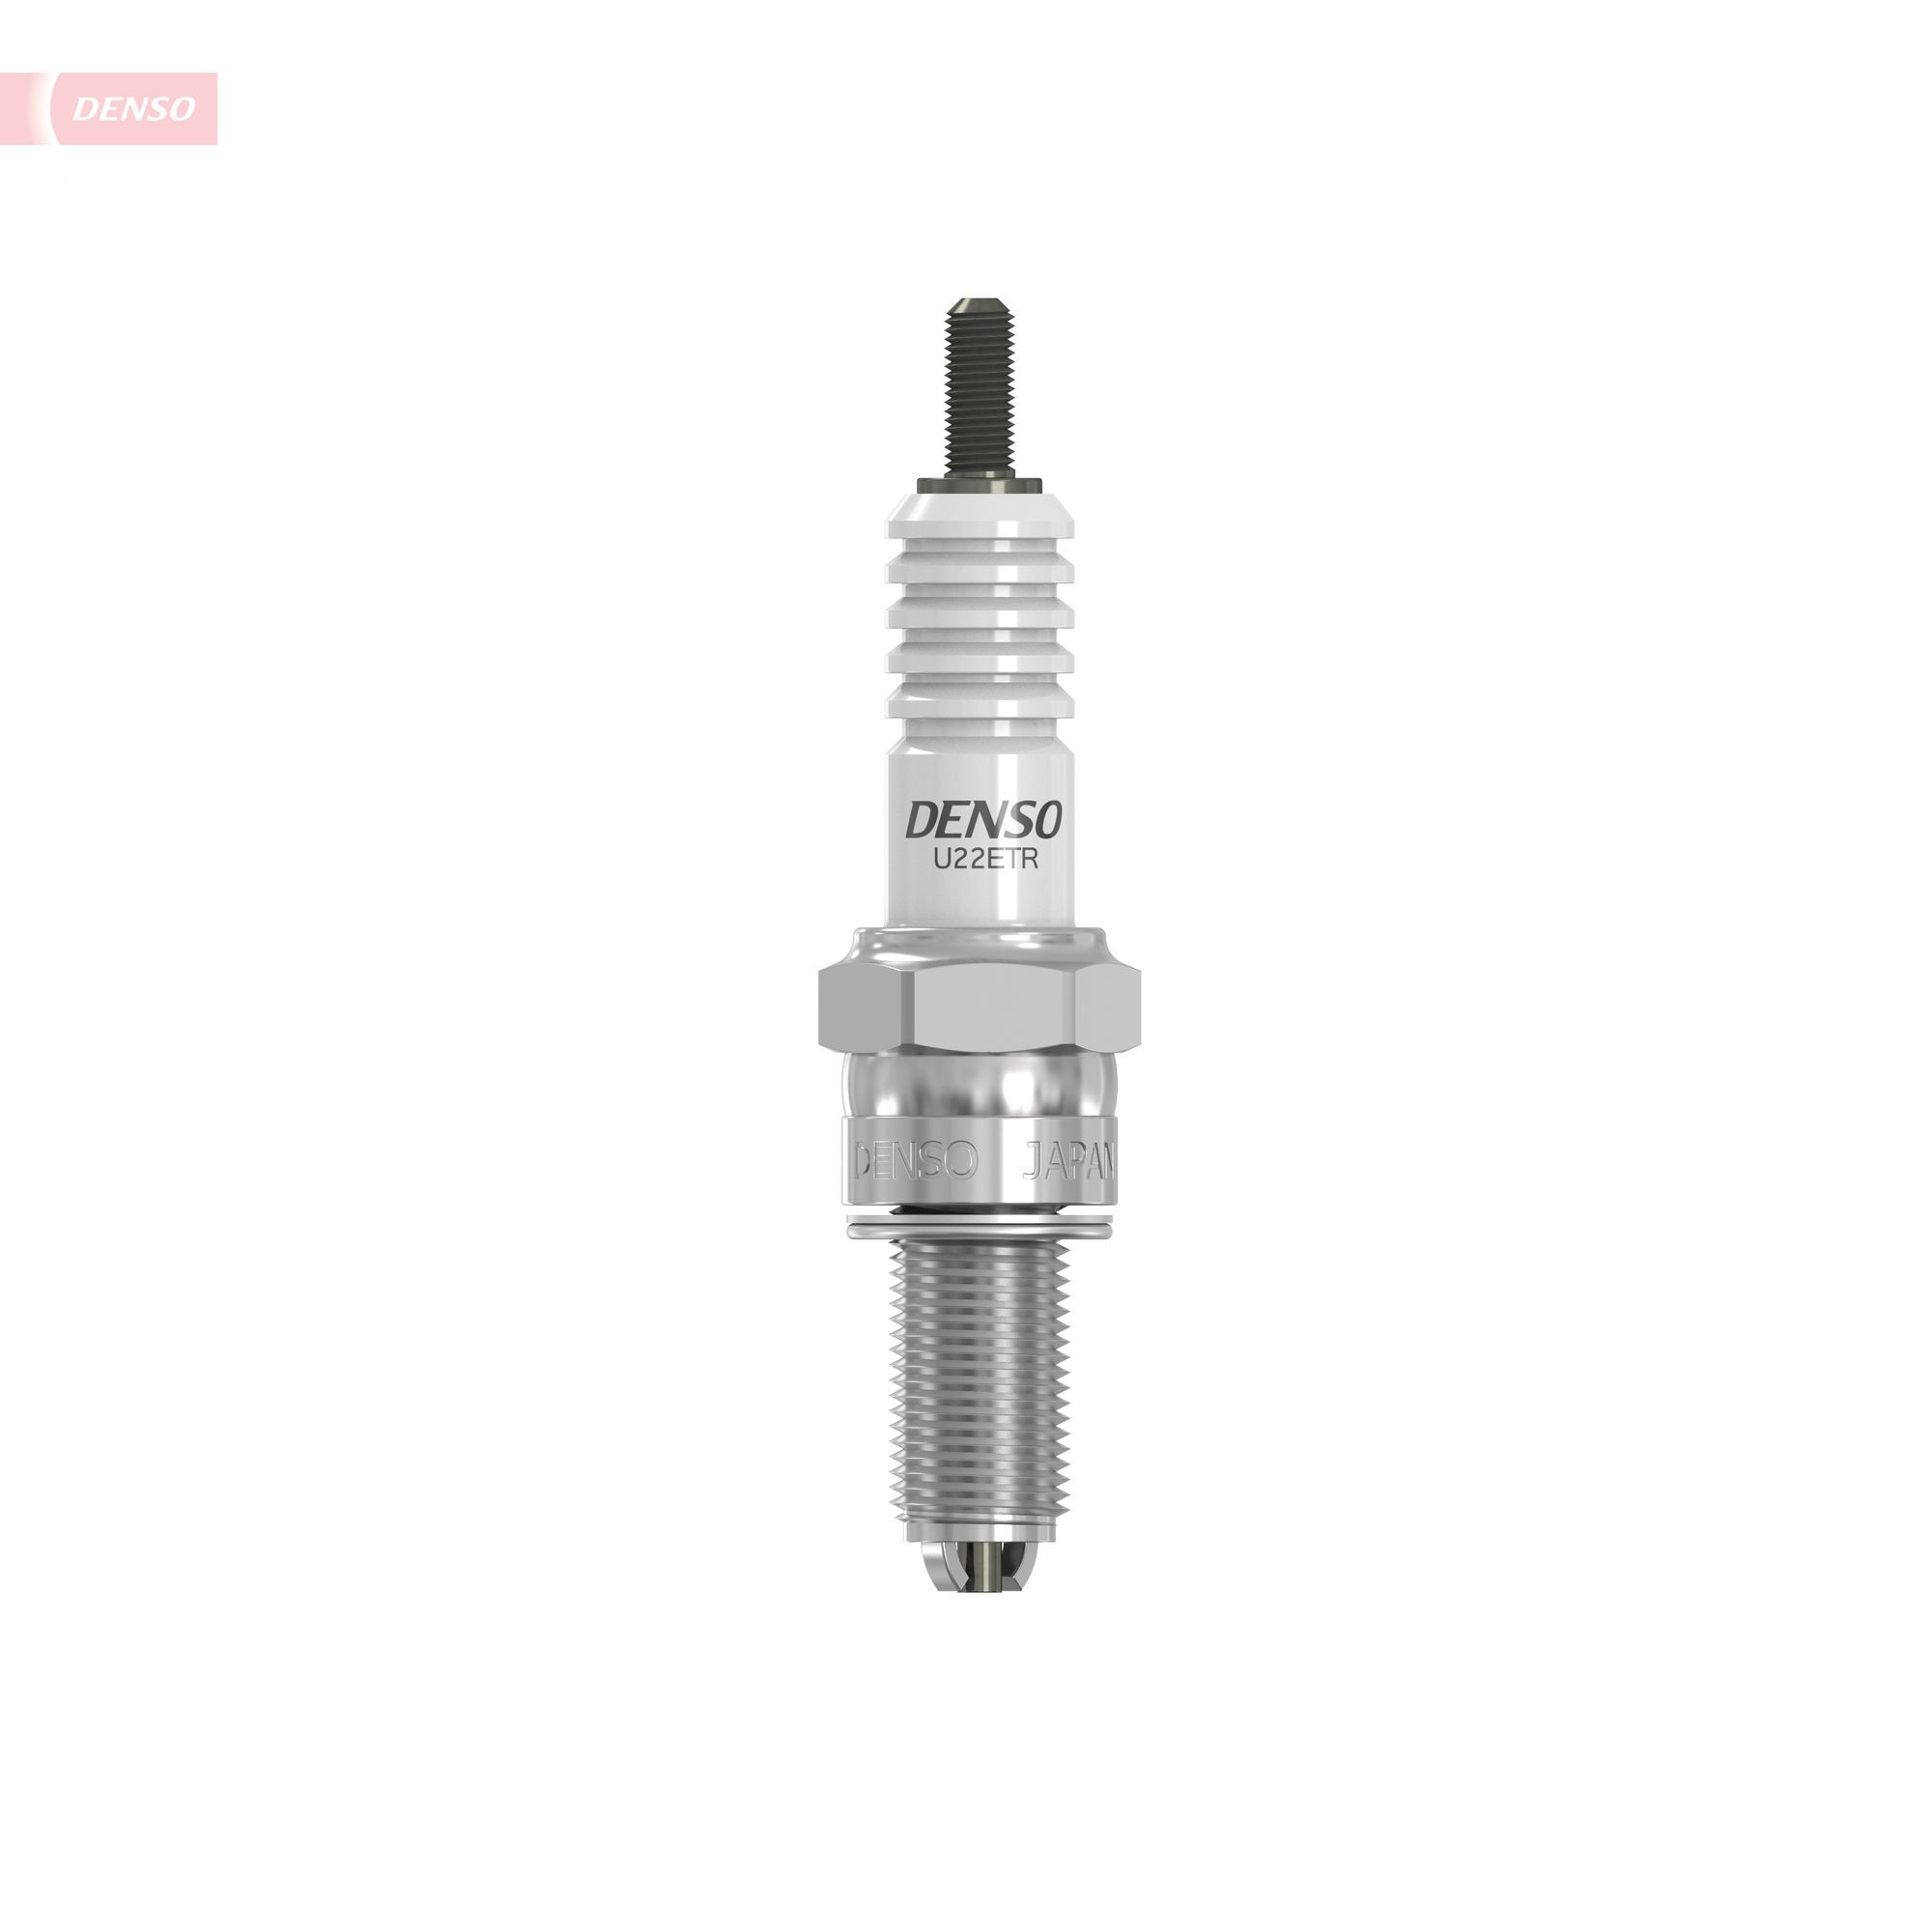 DENSO Spark plugs 4201 buy online